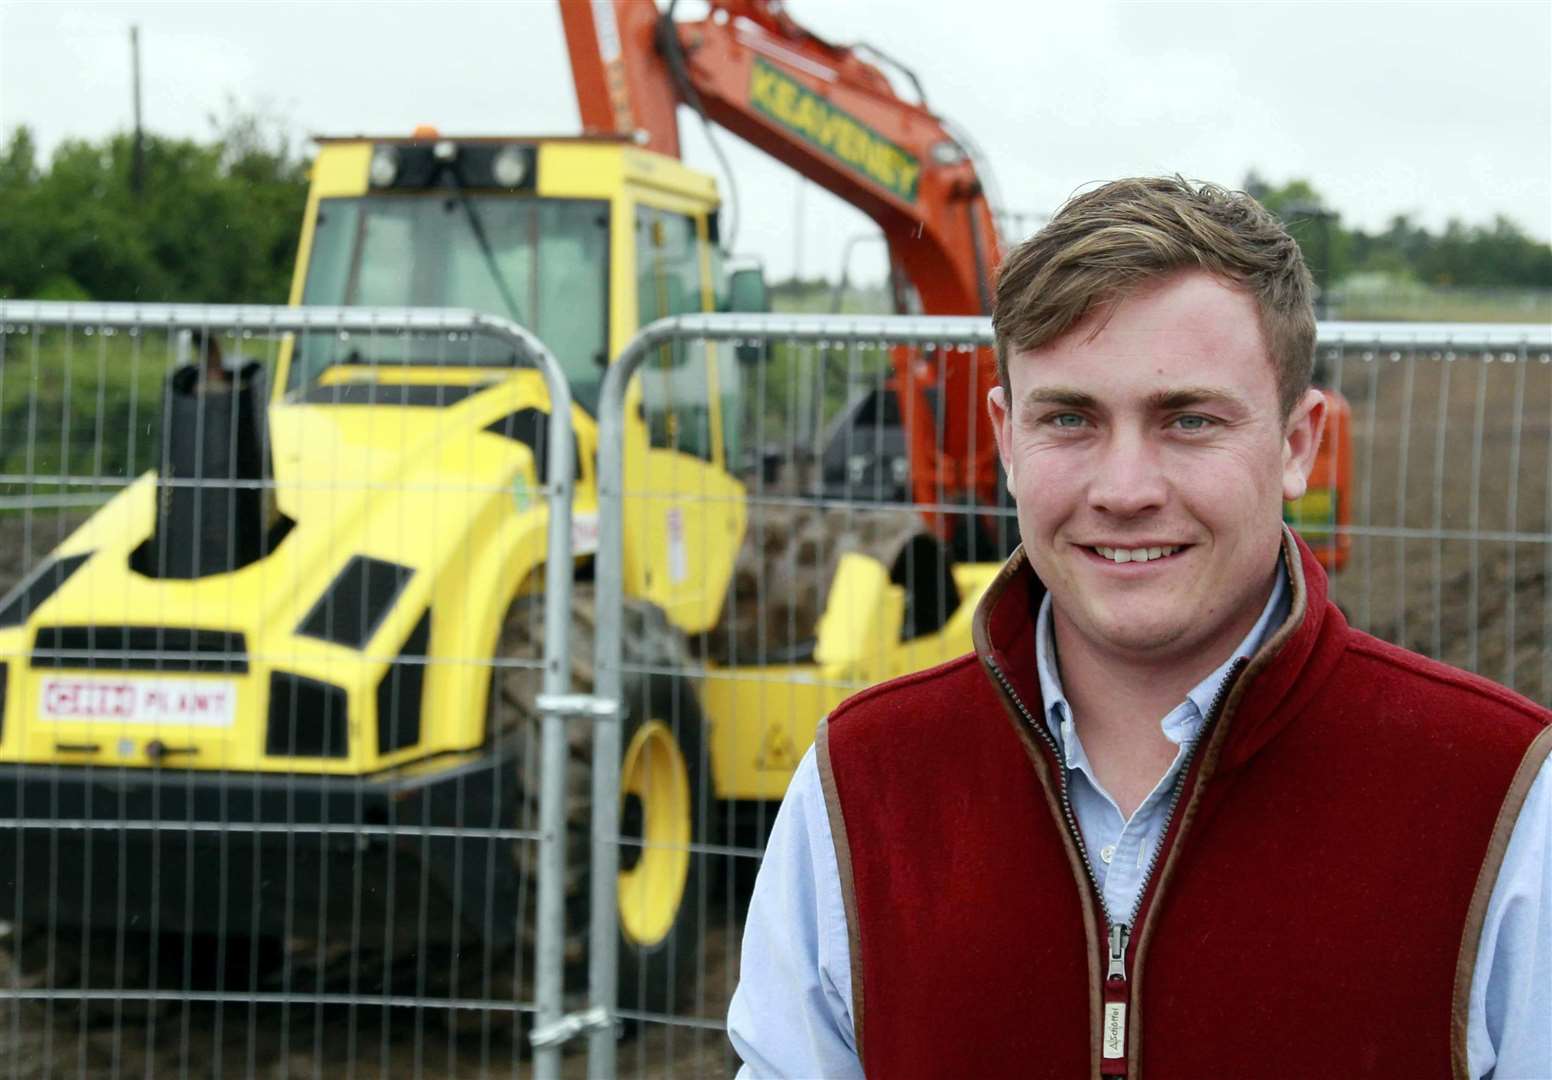 James Attwood, who is a partner in the company along with his dad Stephen, at the Barton Hill Drive site. Picture: Sean Aidan